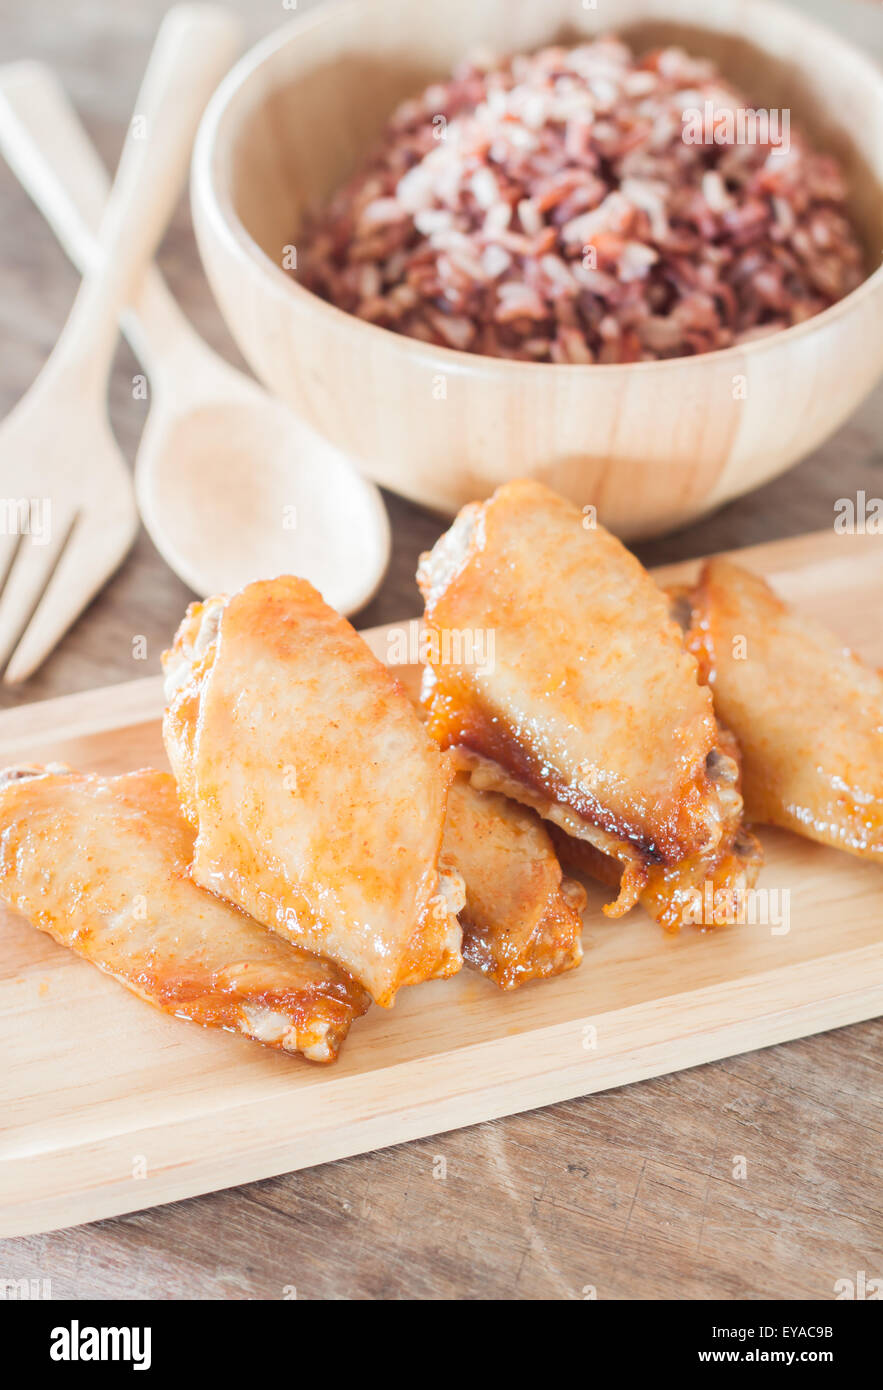 Grilled chicken wings with multi grains berry rice, stock photo Stock Photo